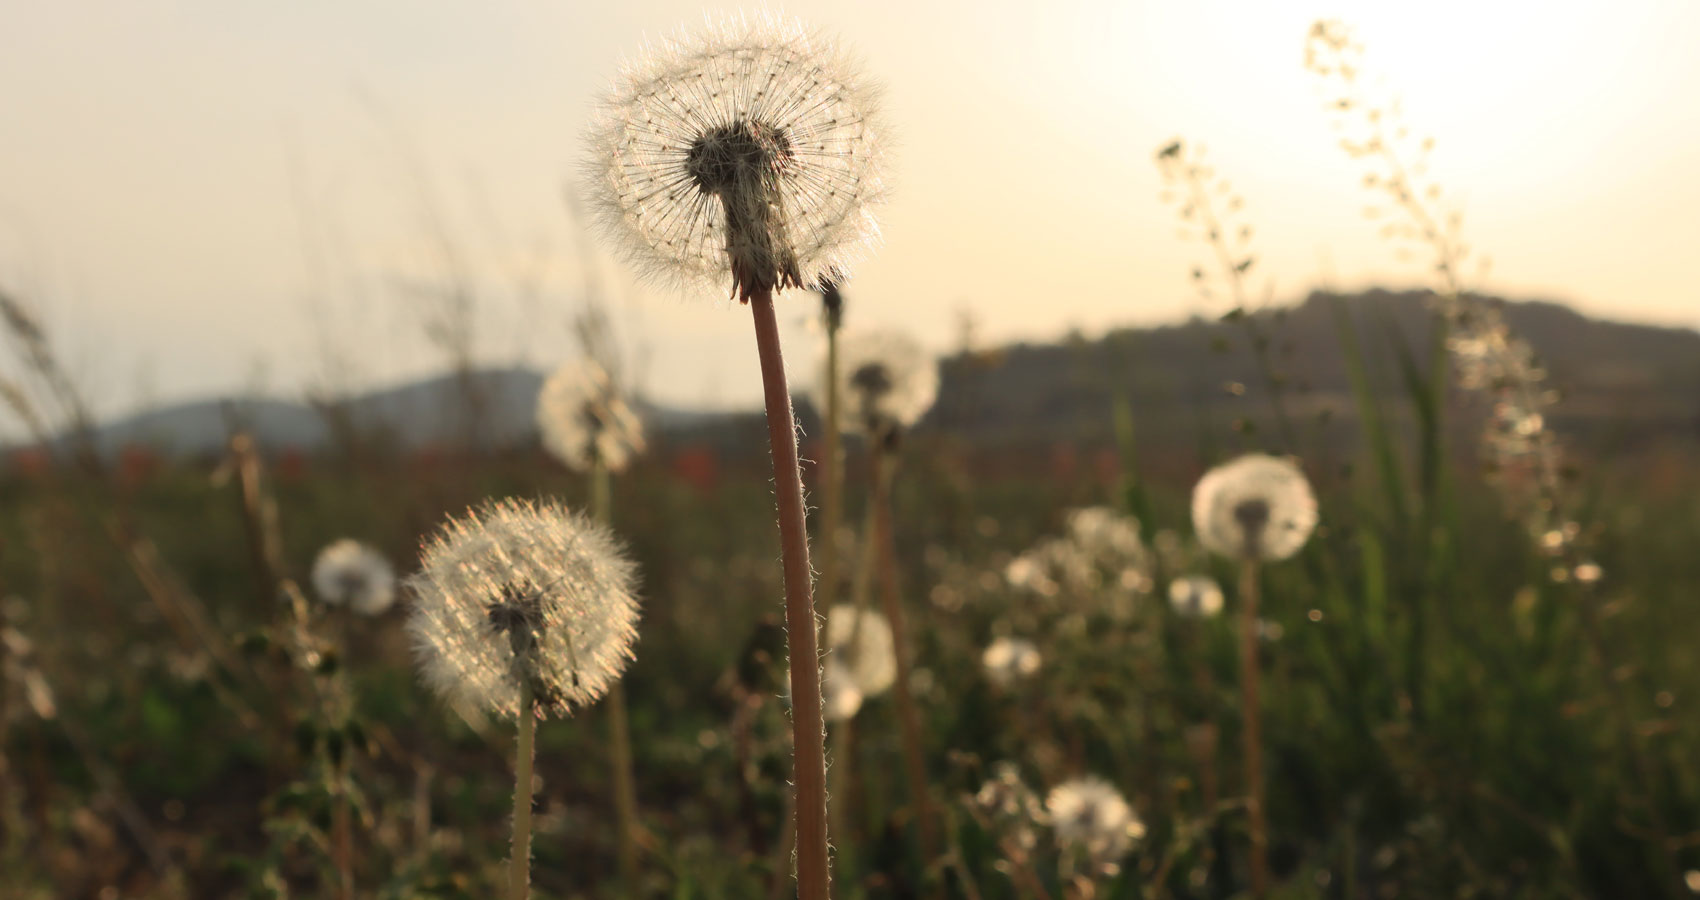 Wishing On Dandelions, poetry by Andrada Costoiu at Spillwords.com